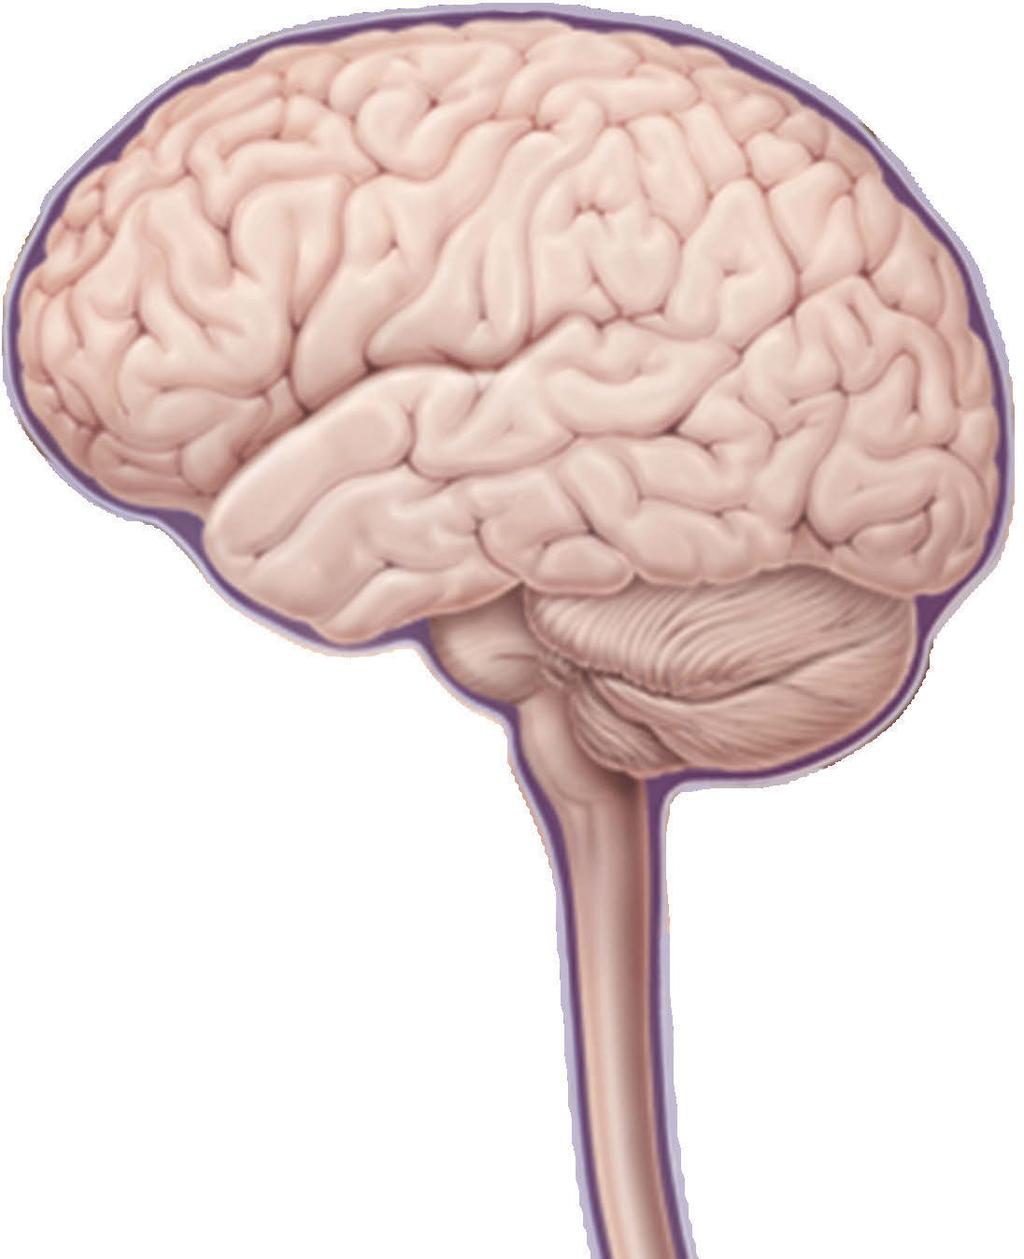 Understanding the symptoms of GBM (continued) Frontal Lobe 6,7 : Responsible for reasoning, planning, judgment, emotions, parts of speech, movement, problem-solving, memory, personality, behavior,